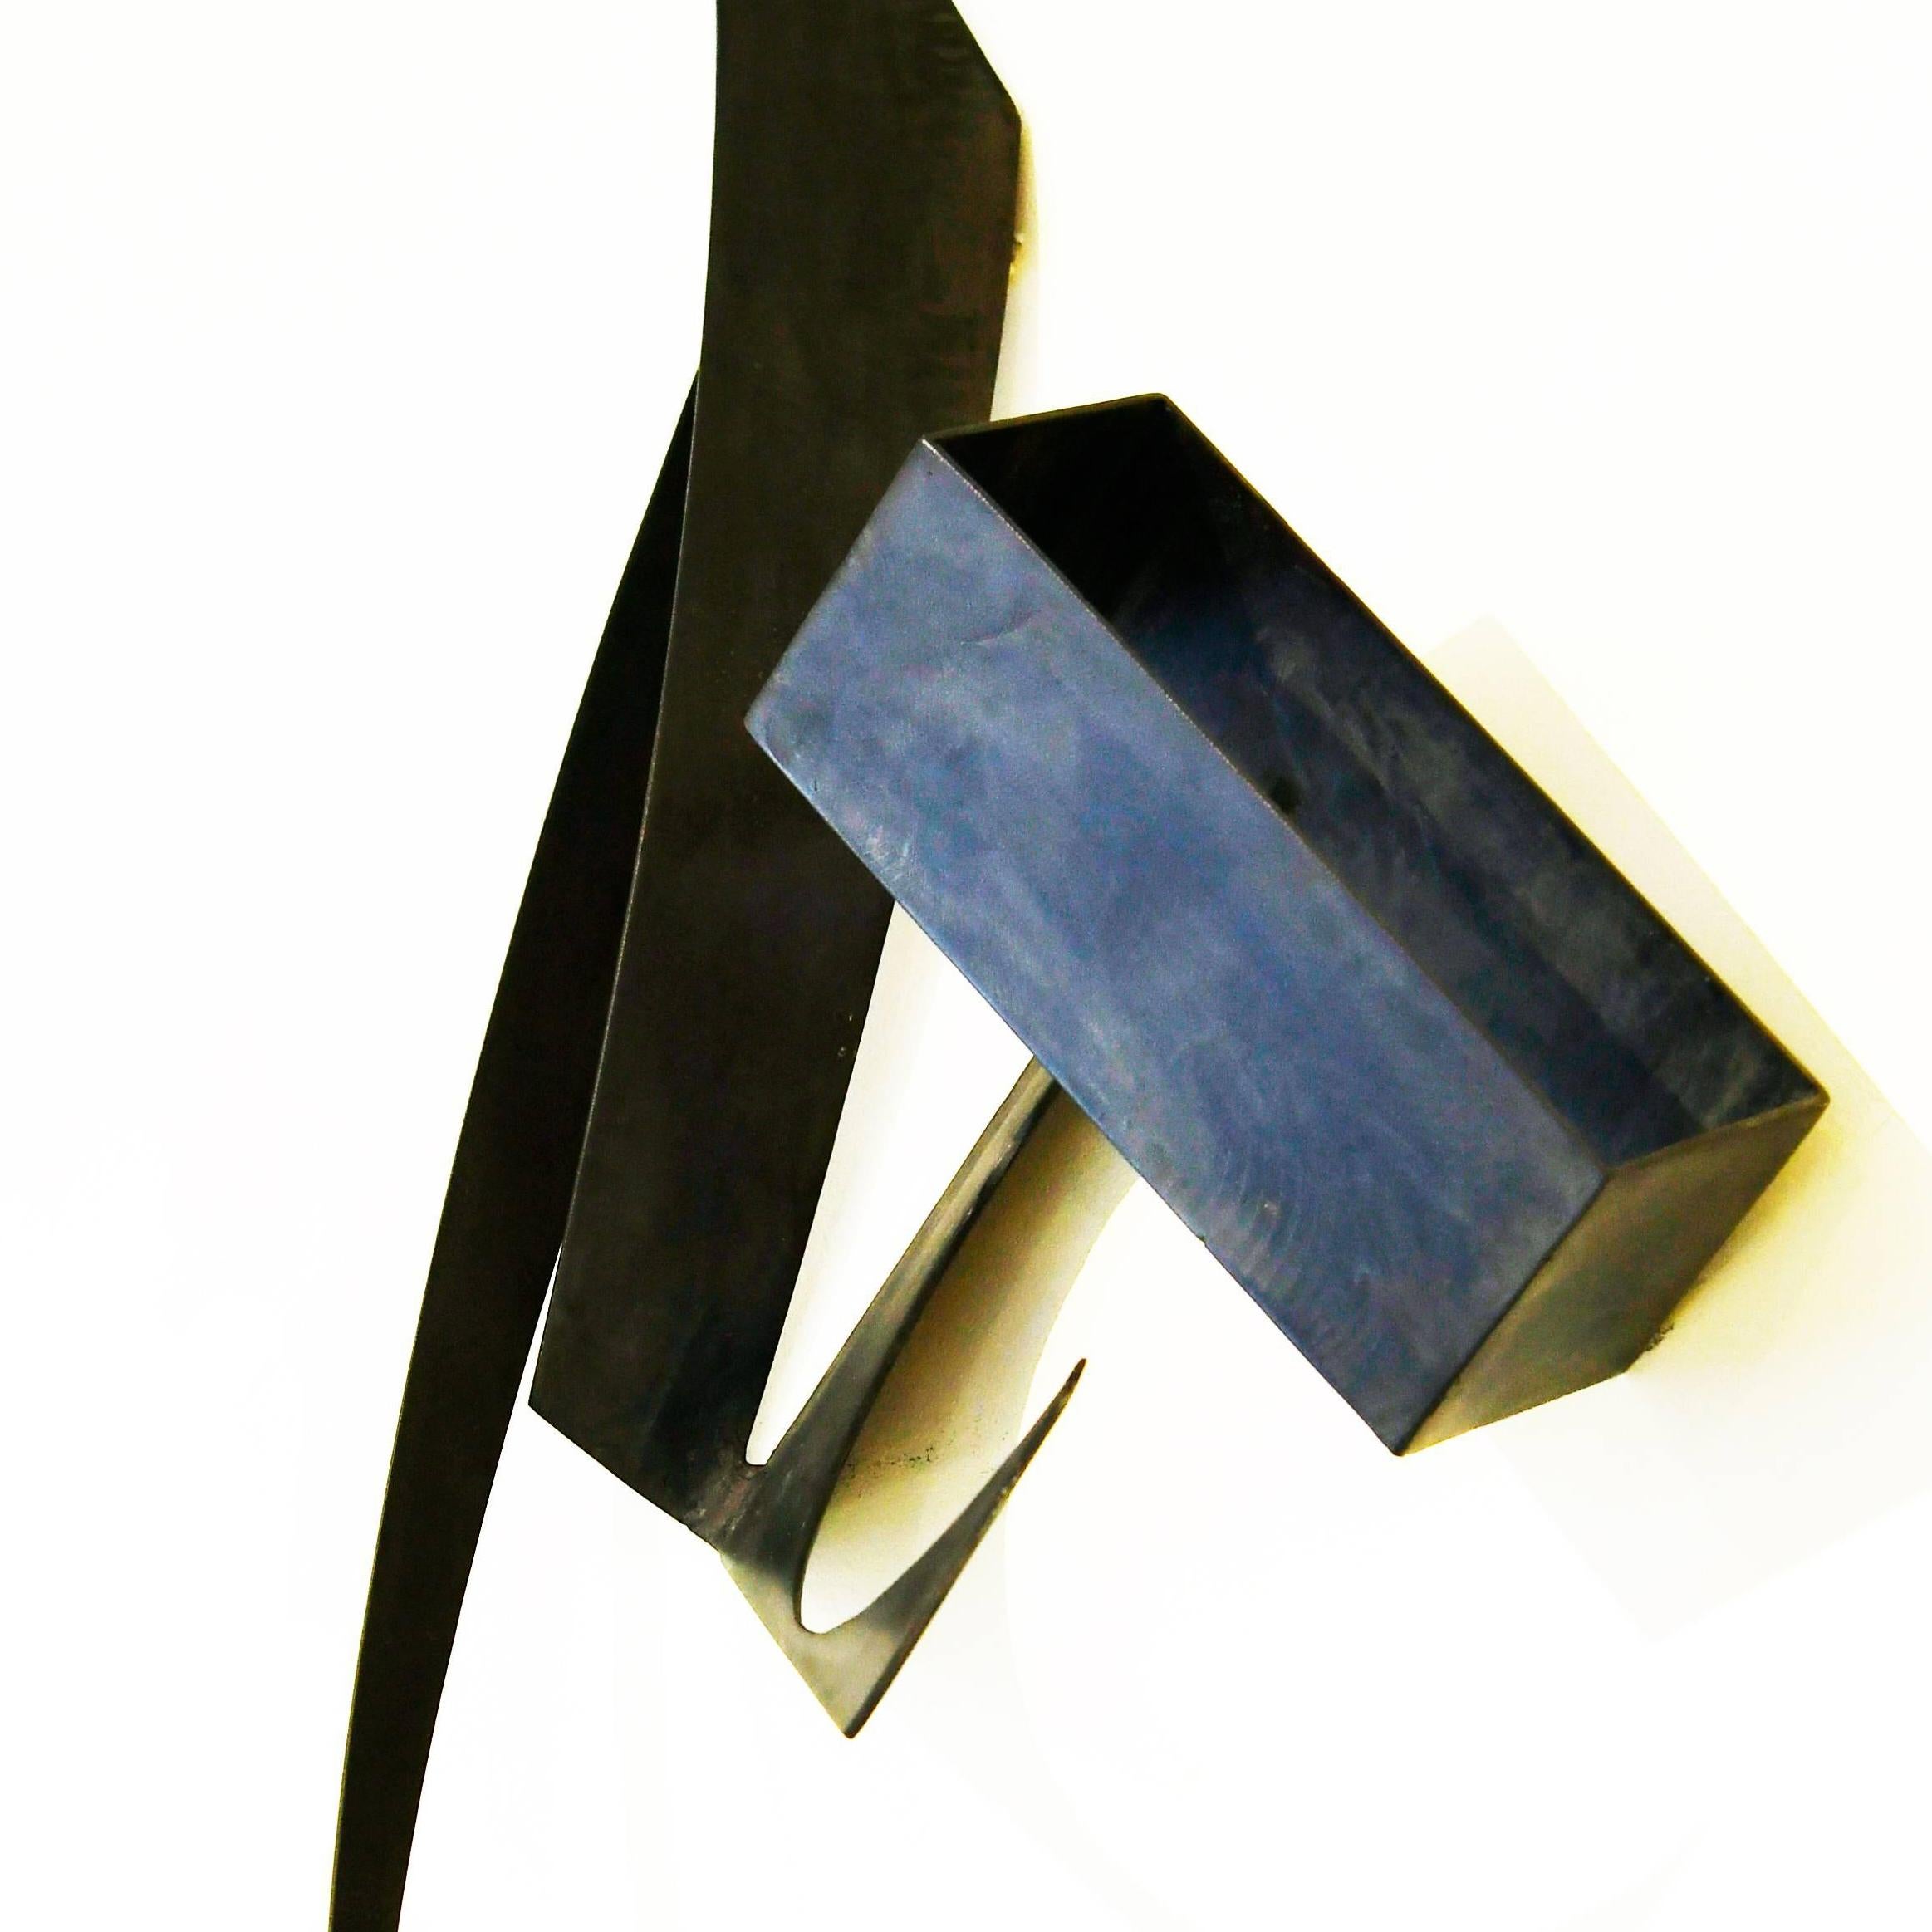 Late for the Future - Abstract Sculpture by Joe Wheaton